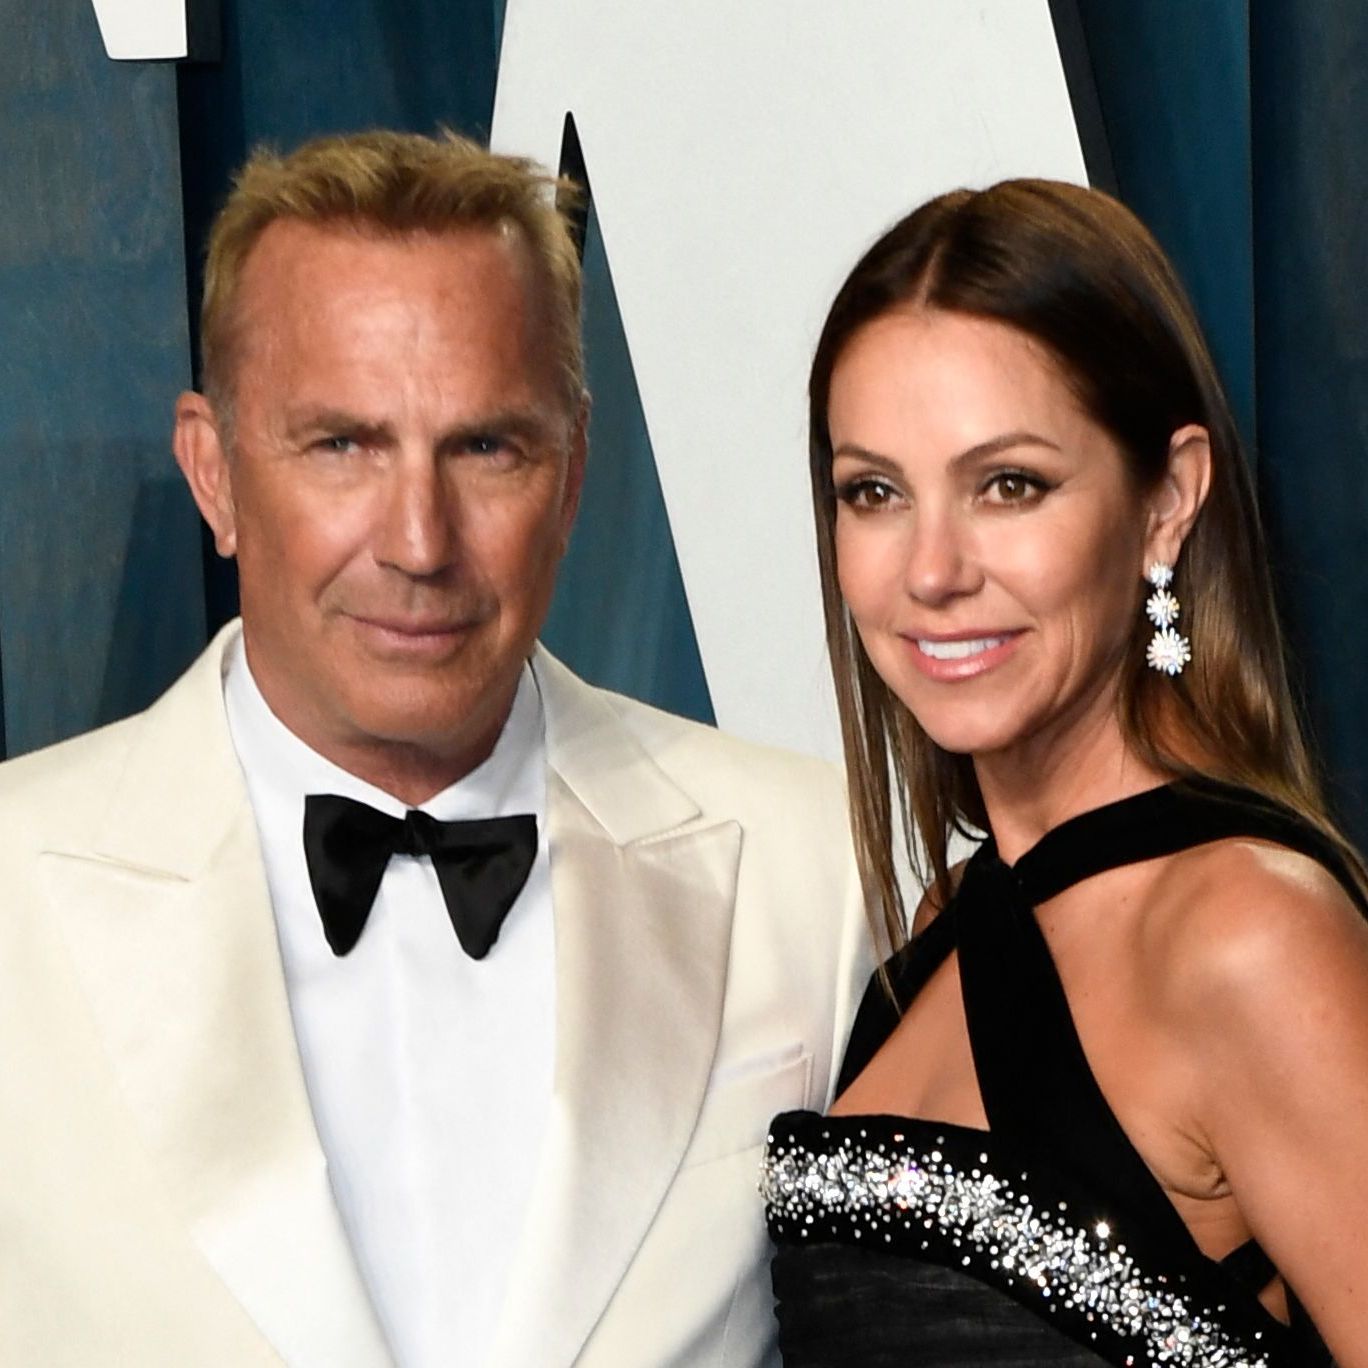 Kevin Costner Reportedly Accuses Ex-Wife of Taking Property